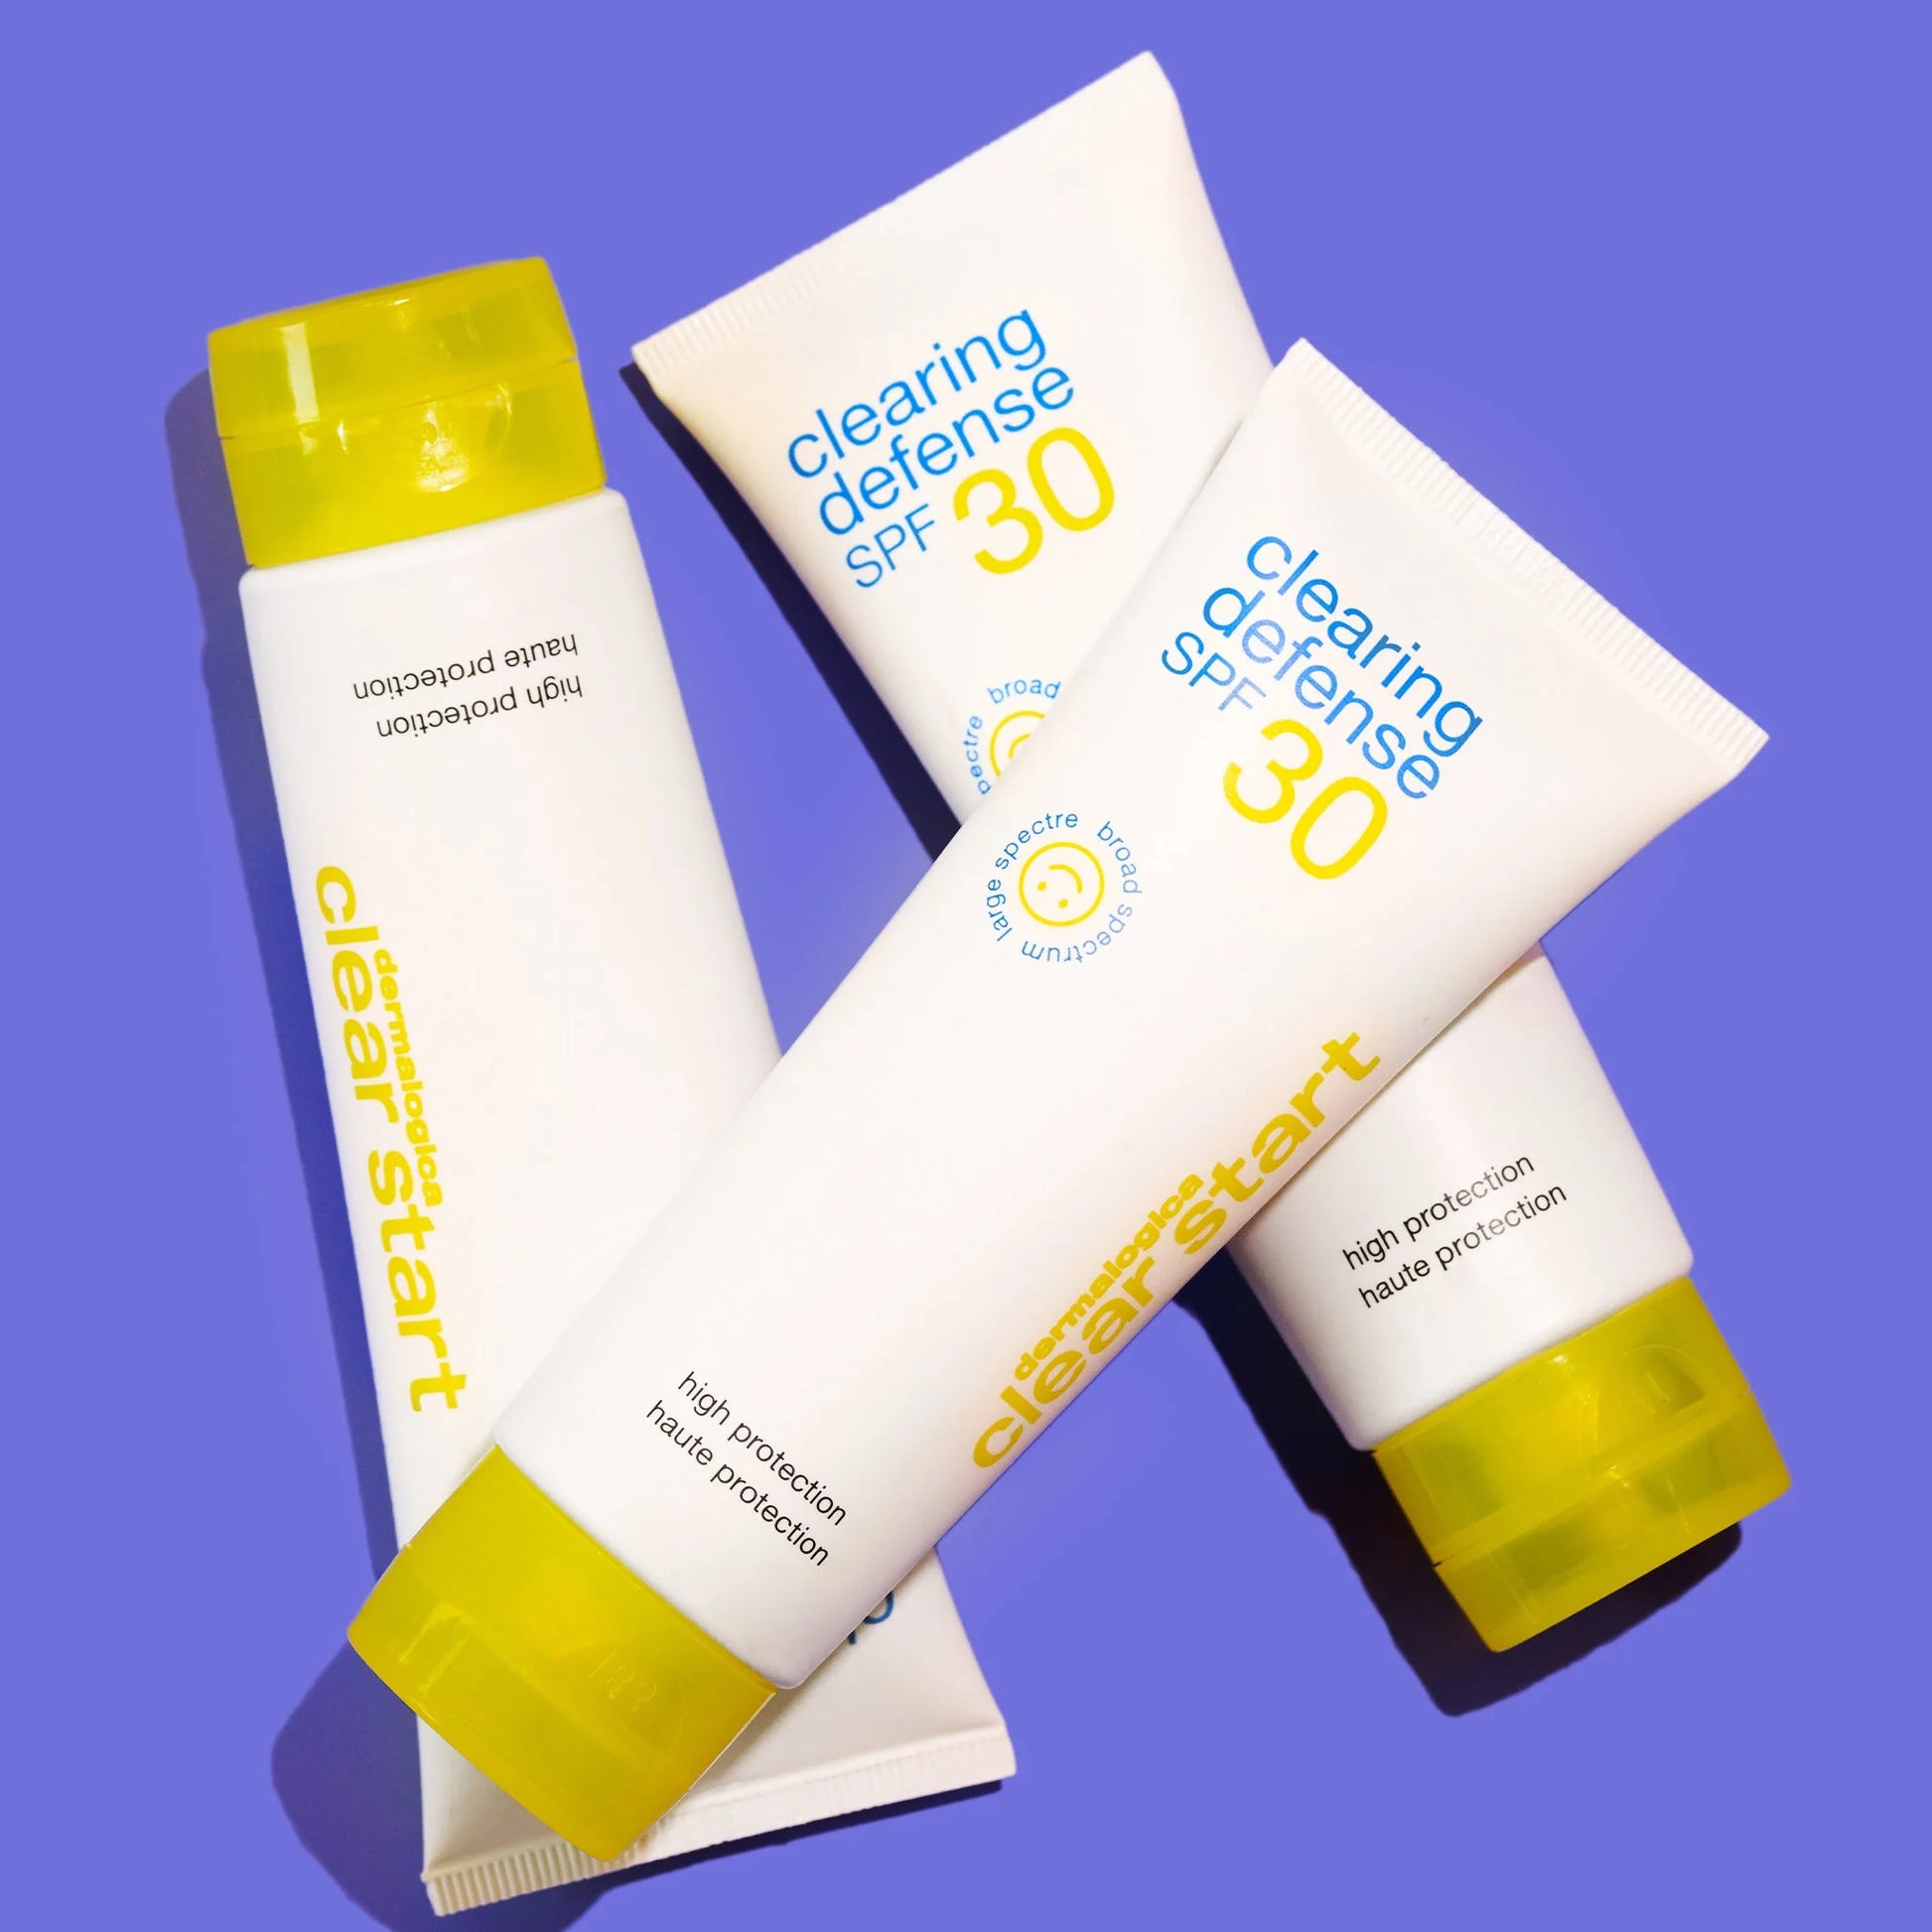 Clearing Defense SPF30 (20% OFF) (6541219037362)